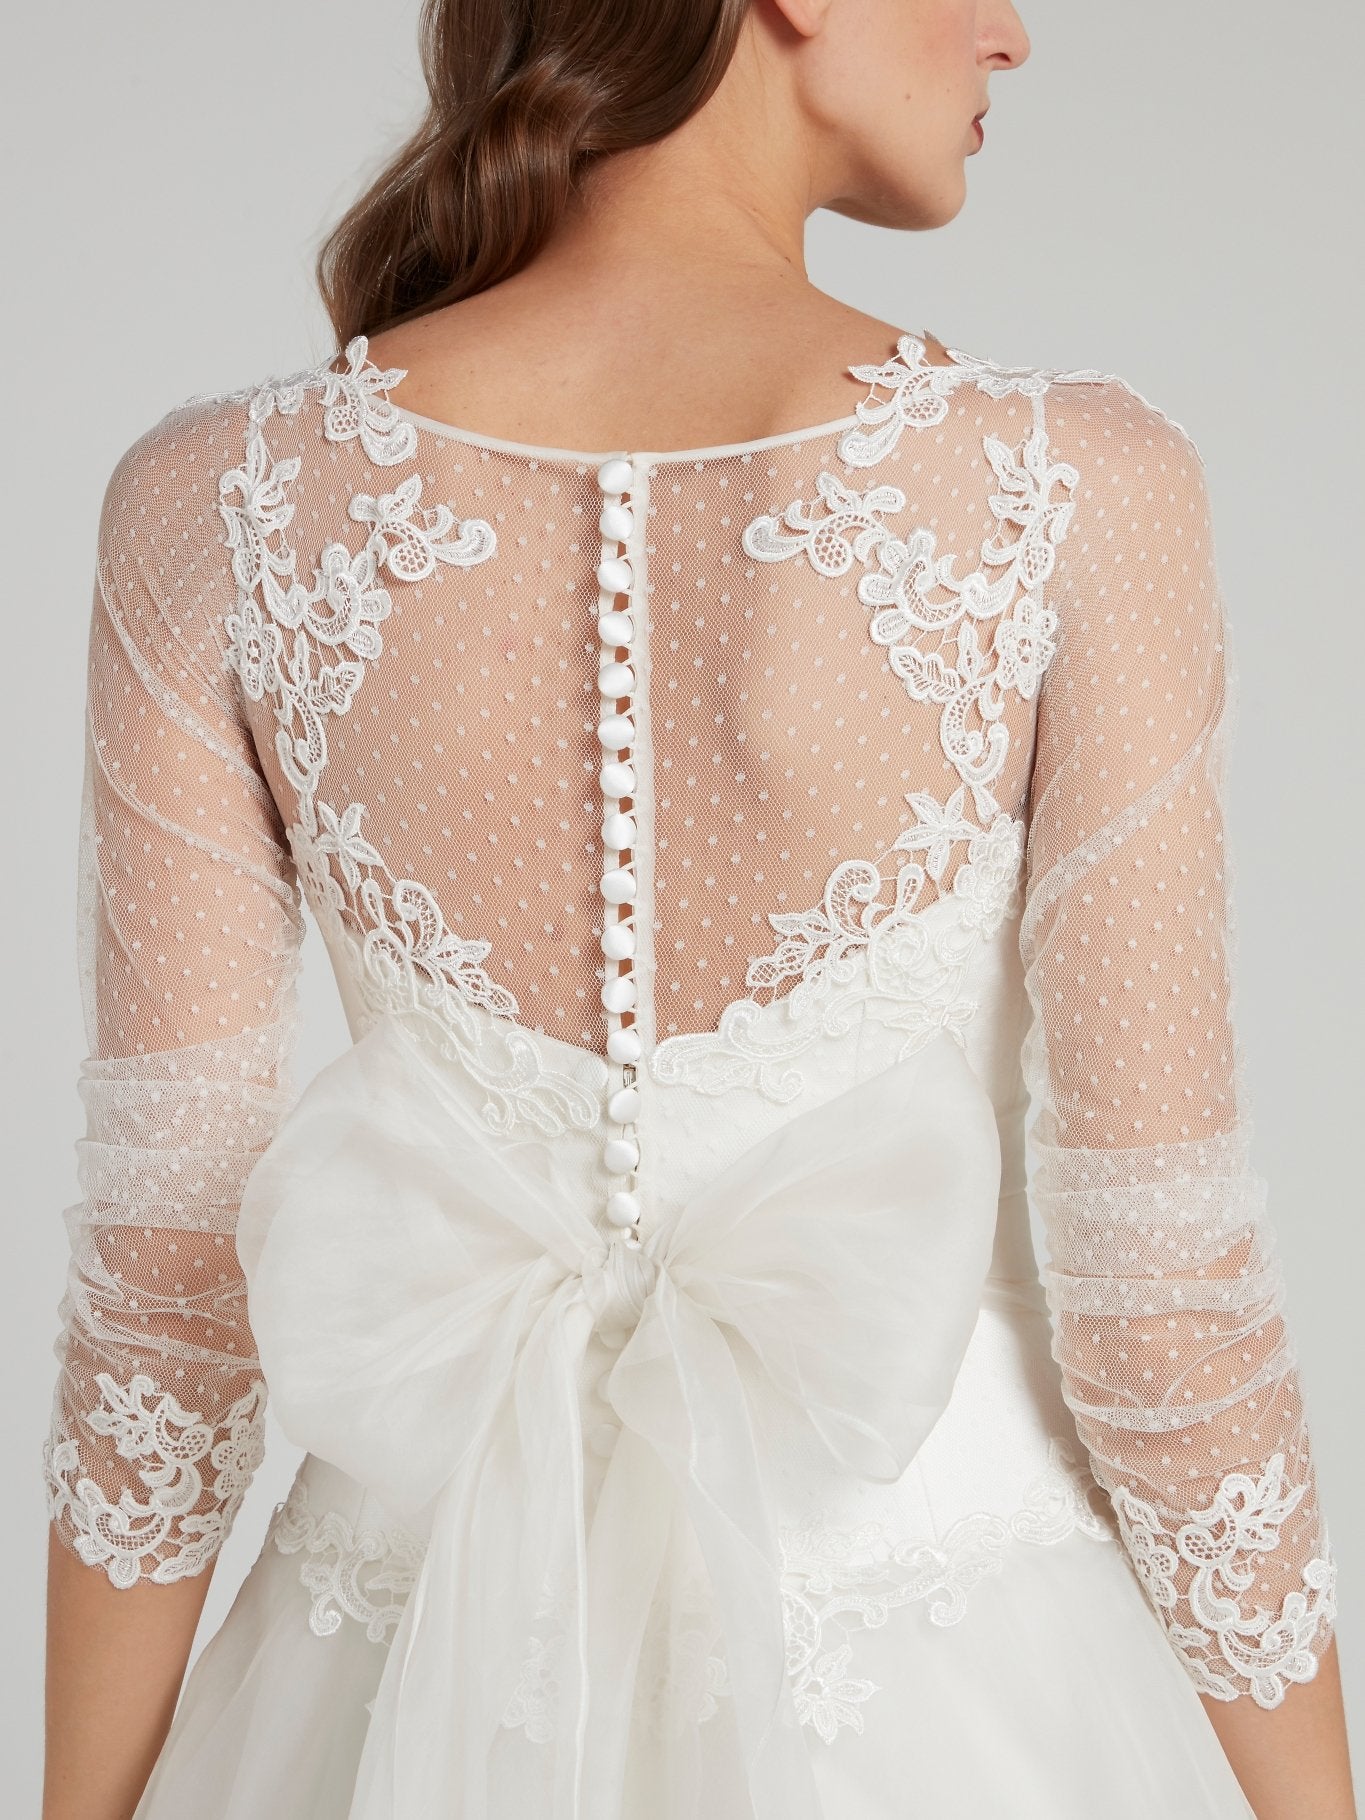 Bridal Long Sleeve White Lace Overlay / Bridesmaid Cover up Top / Topper /  Bolero Shirt Available in 4 Sleeve Options and 2 Lengths 